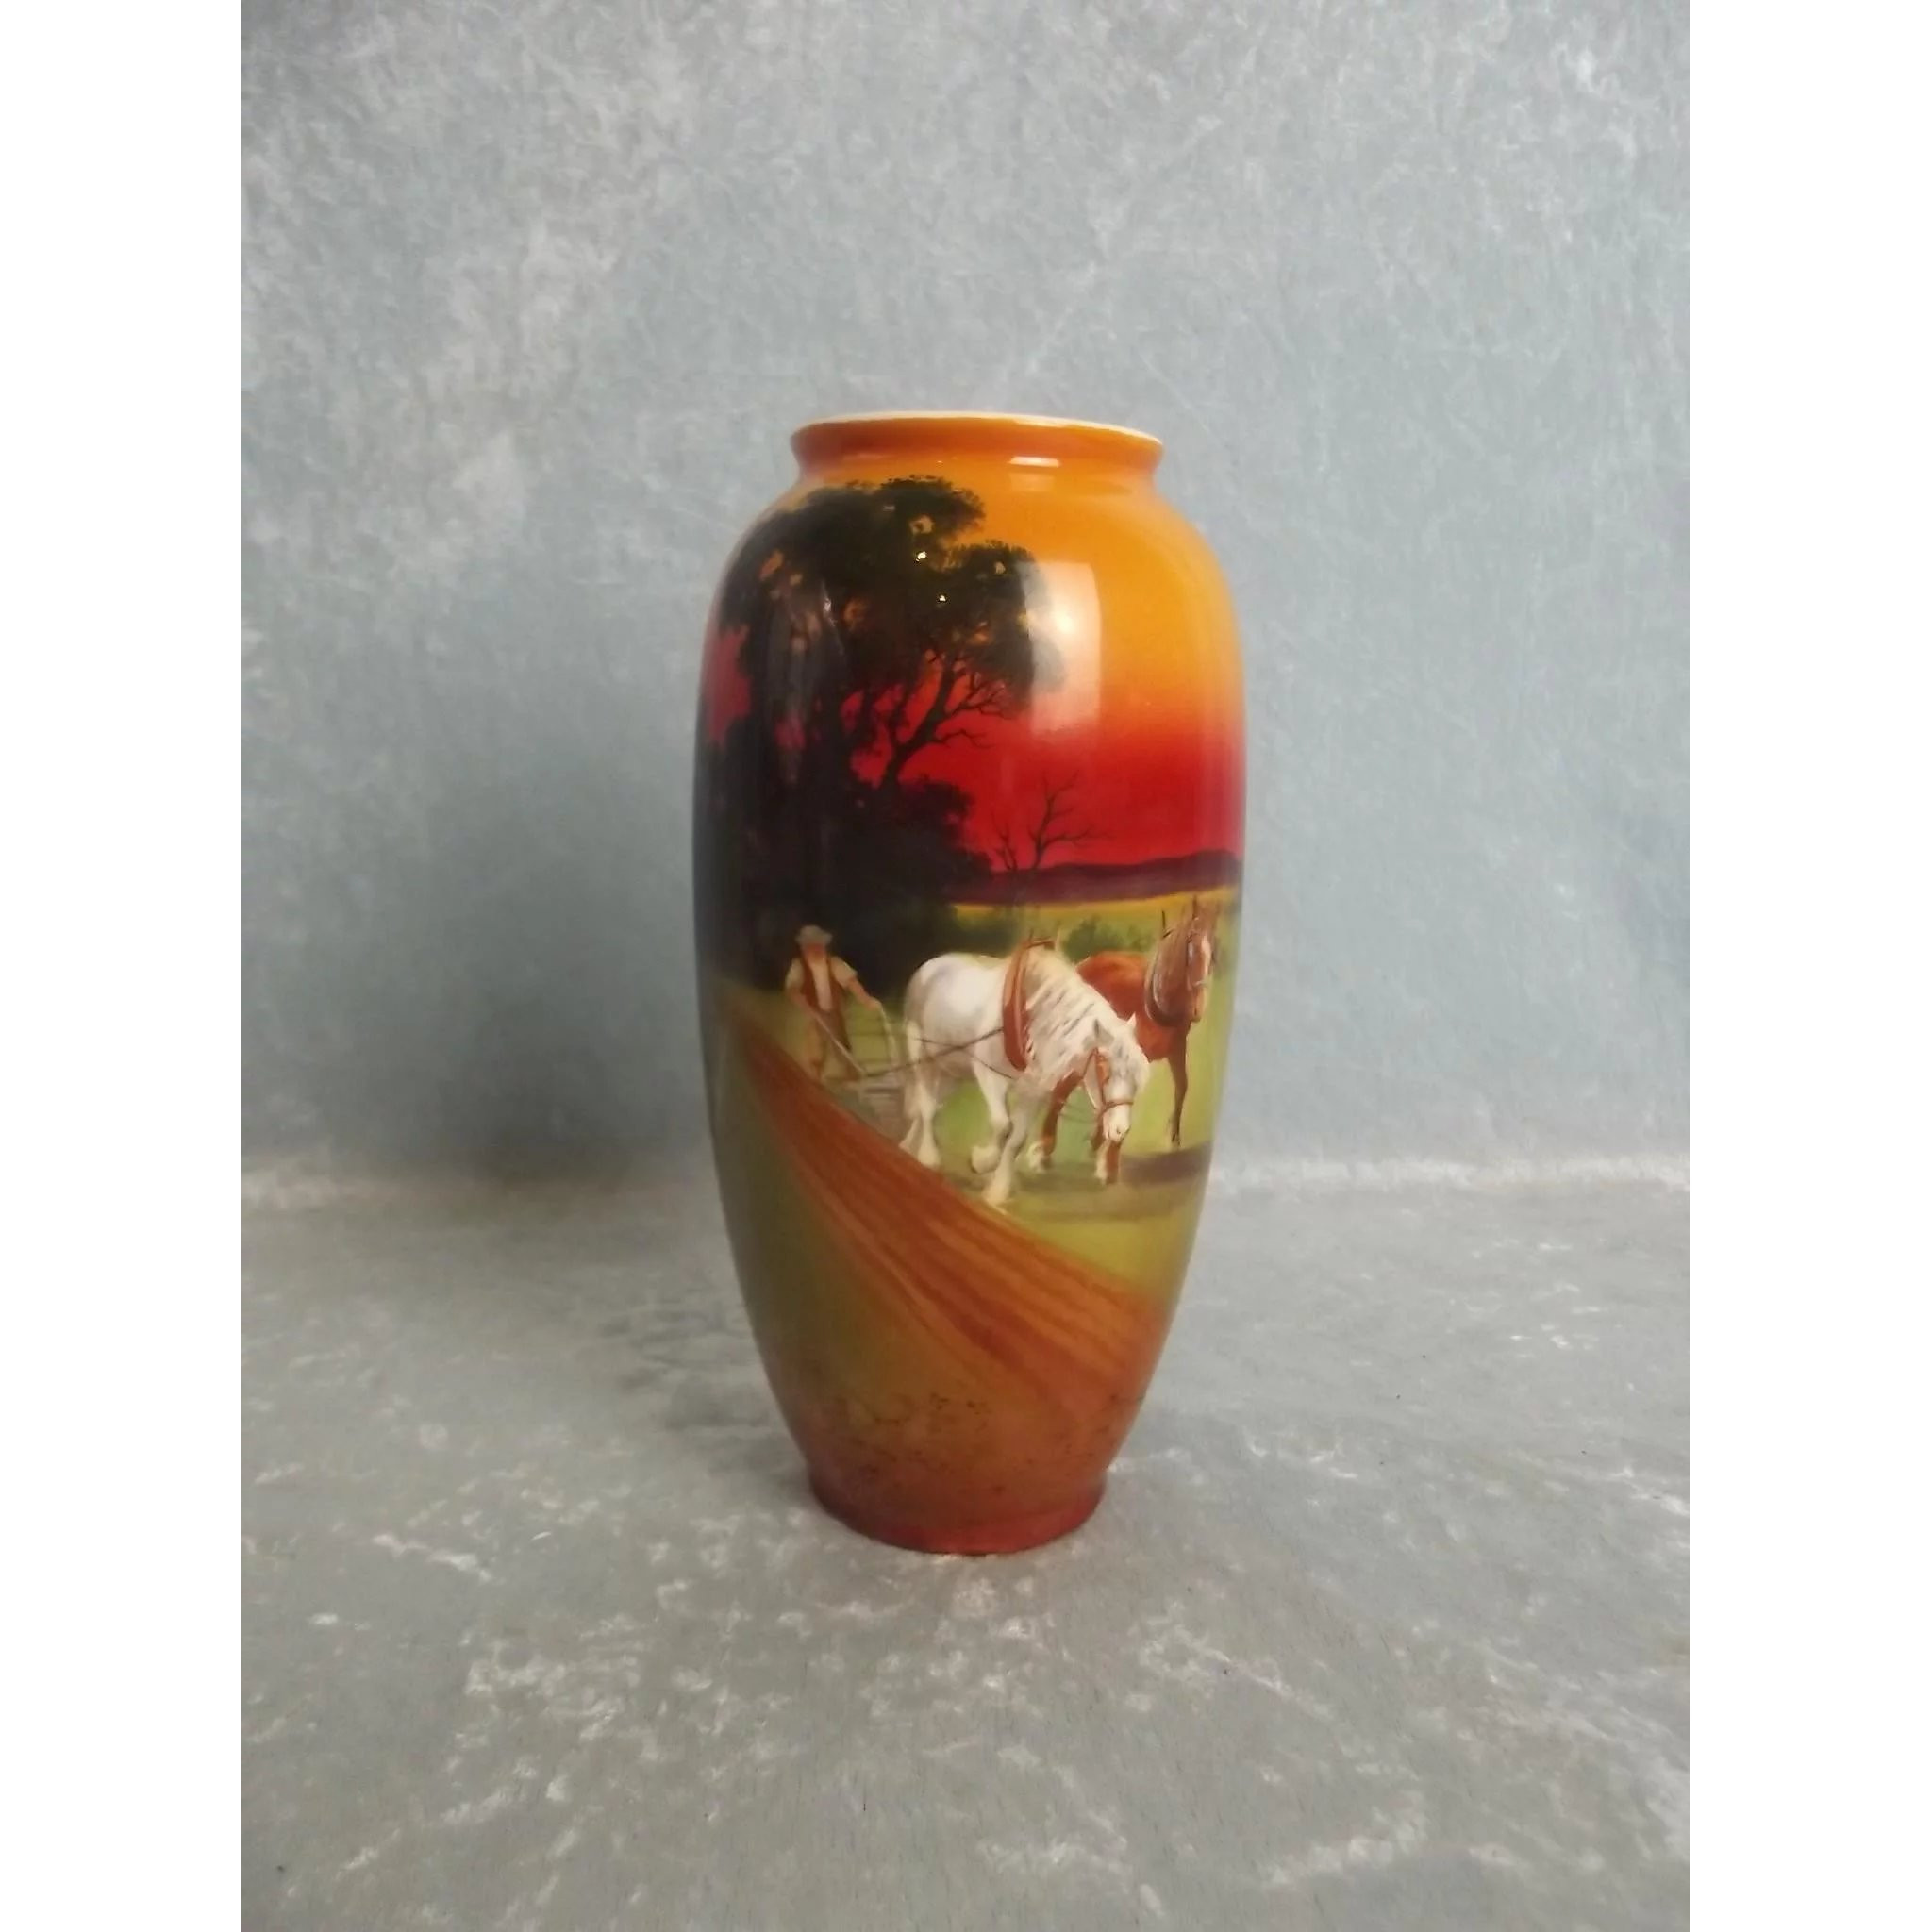 15 Amazing Royal Doulton Vases 1920 2024 free download royal doulton vases 1920 of circa 1920 royal doulton vase with hand painted scene of heavy throughout circa 1920 royal doulton vase with hand painted scene of heavy horses the antiques store